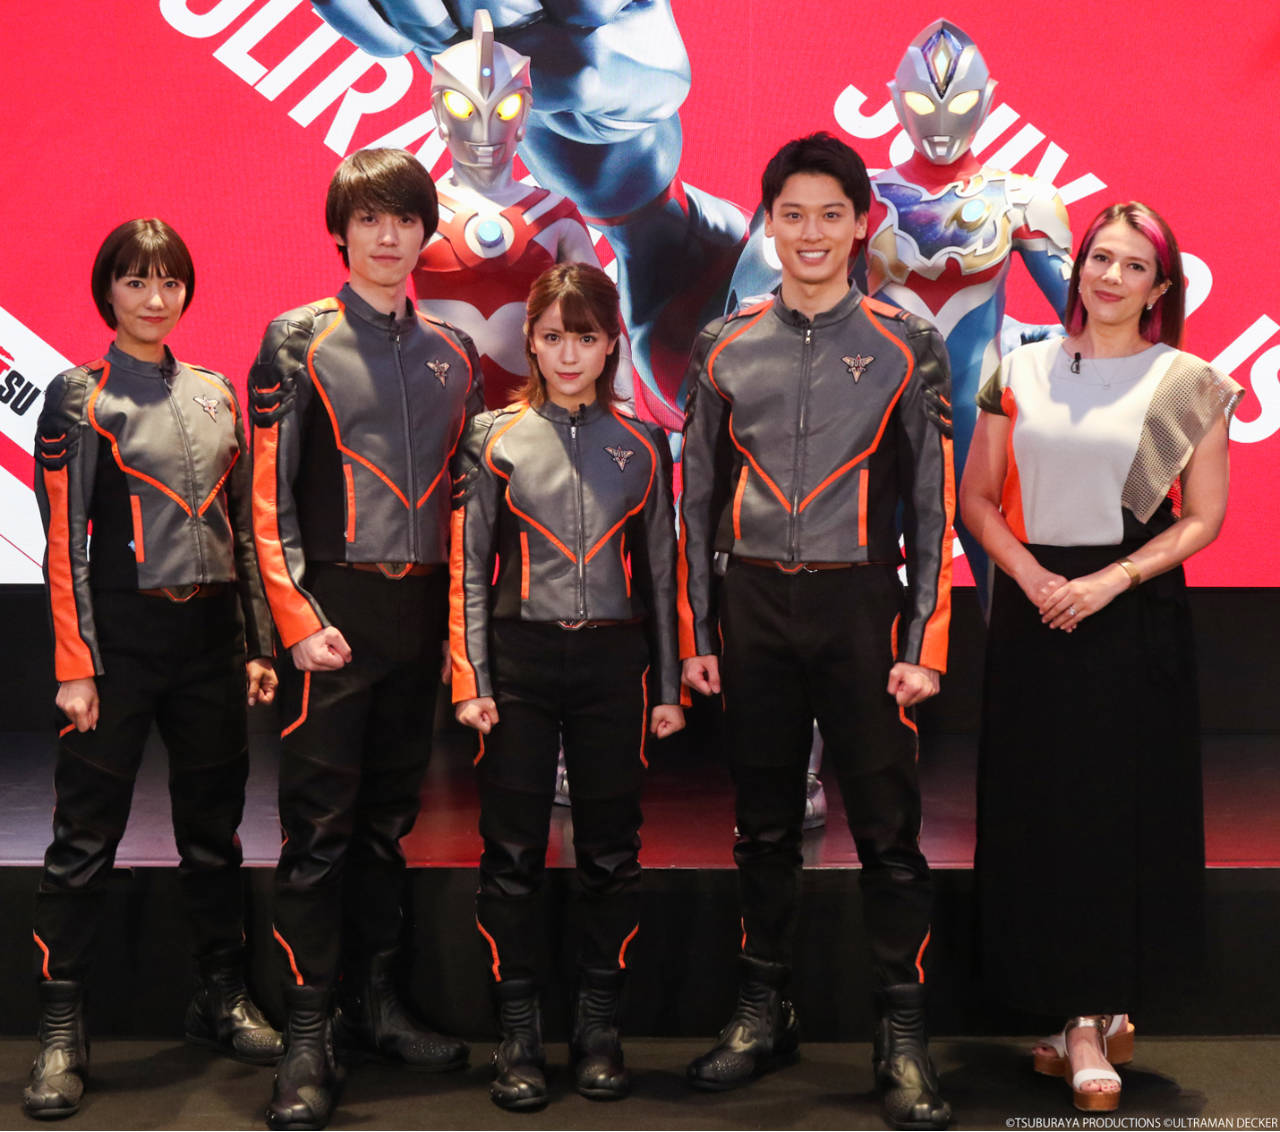 ULTRAMAN CONNECTION LIVE: ULTRAMAN DAY 2022 - WHAT HAPPENED?